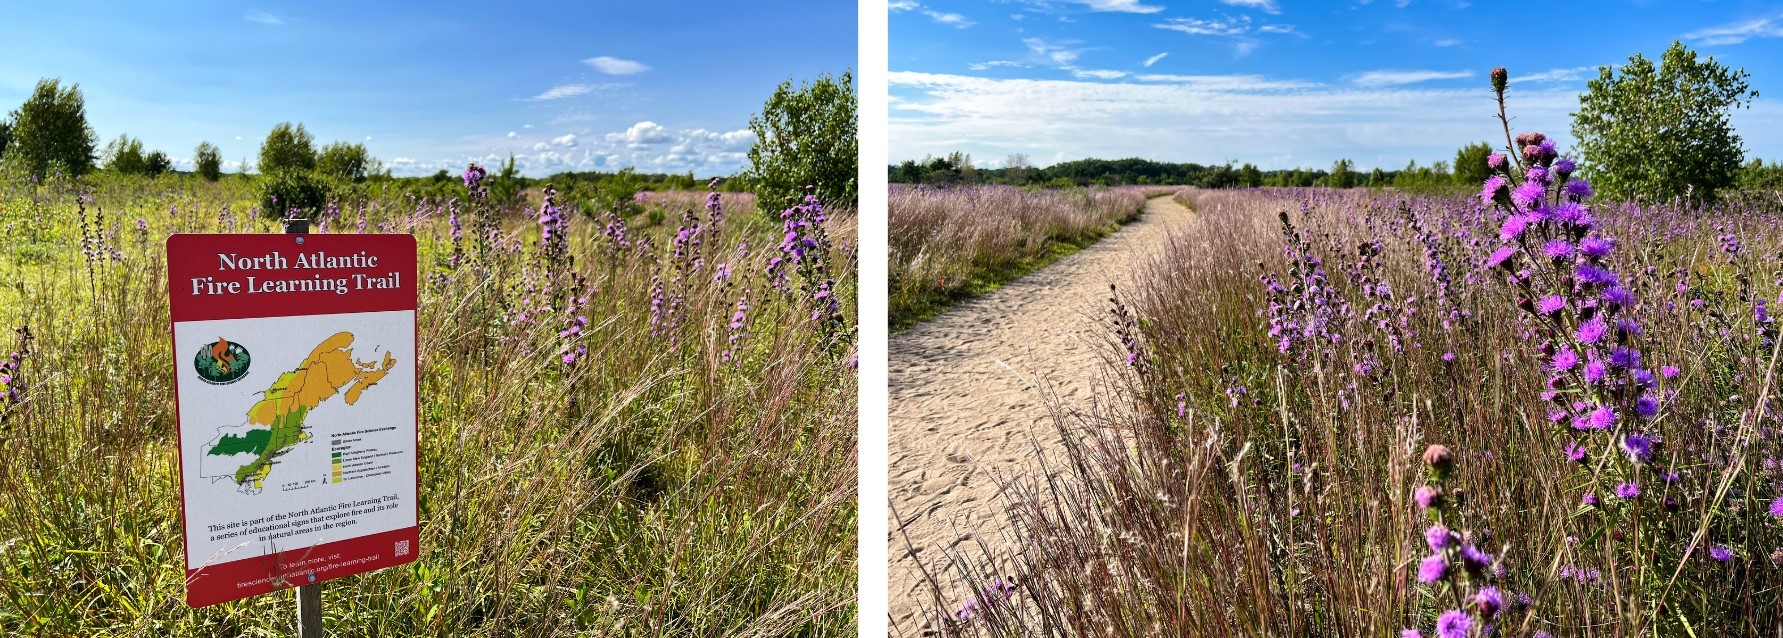 A sign designating the North Atlantic Fire Learning Trail along a sandy path through purple flowering grassland plants.